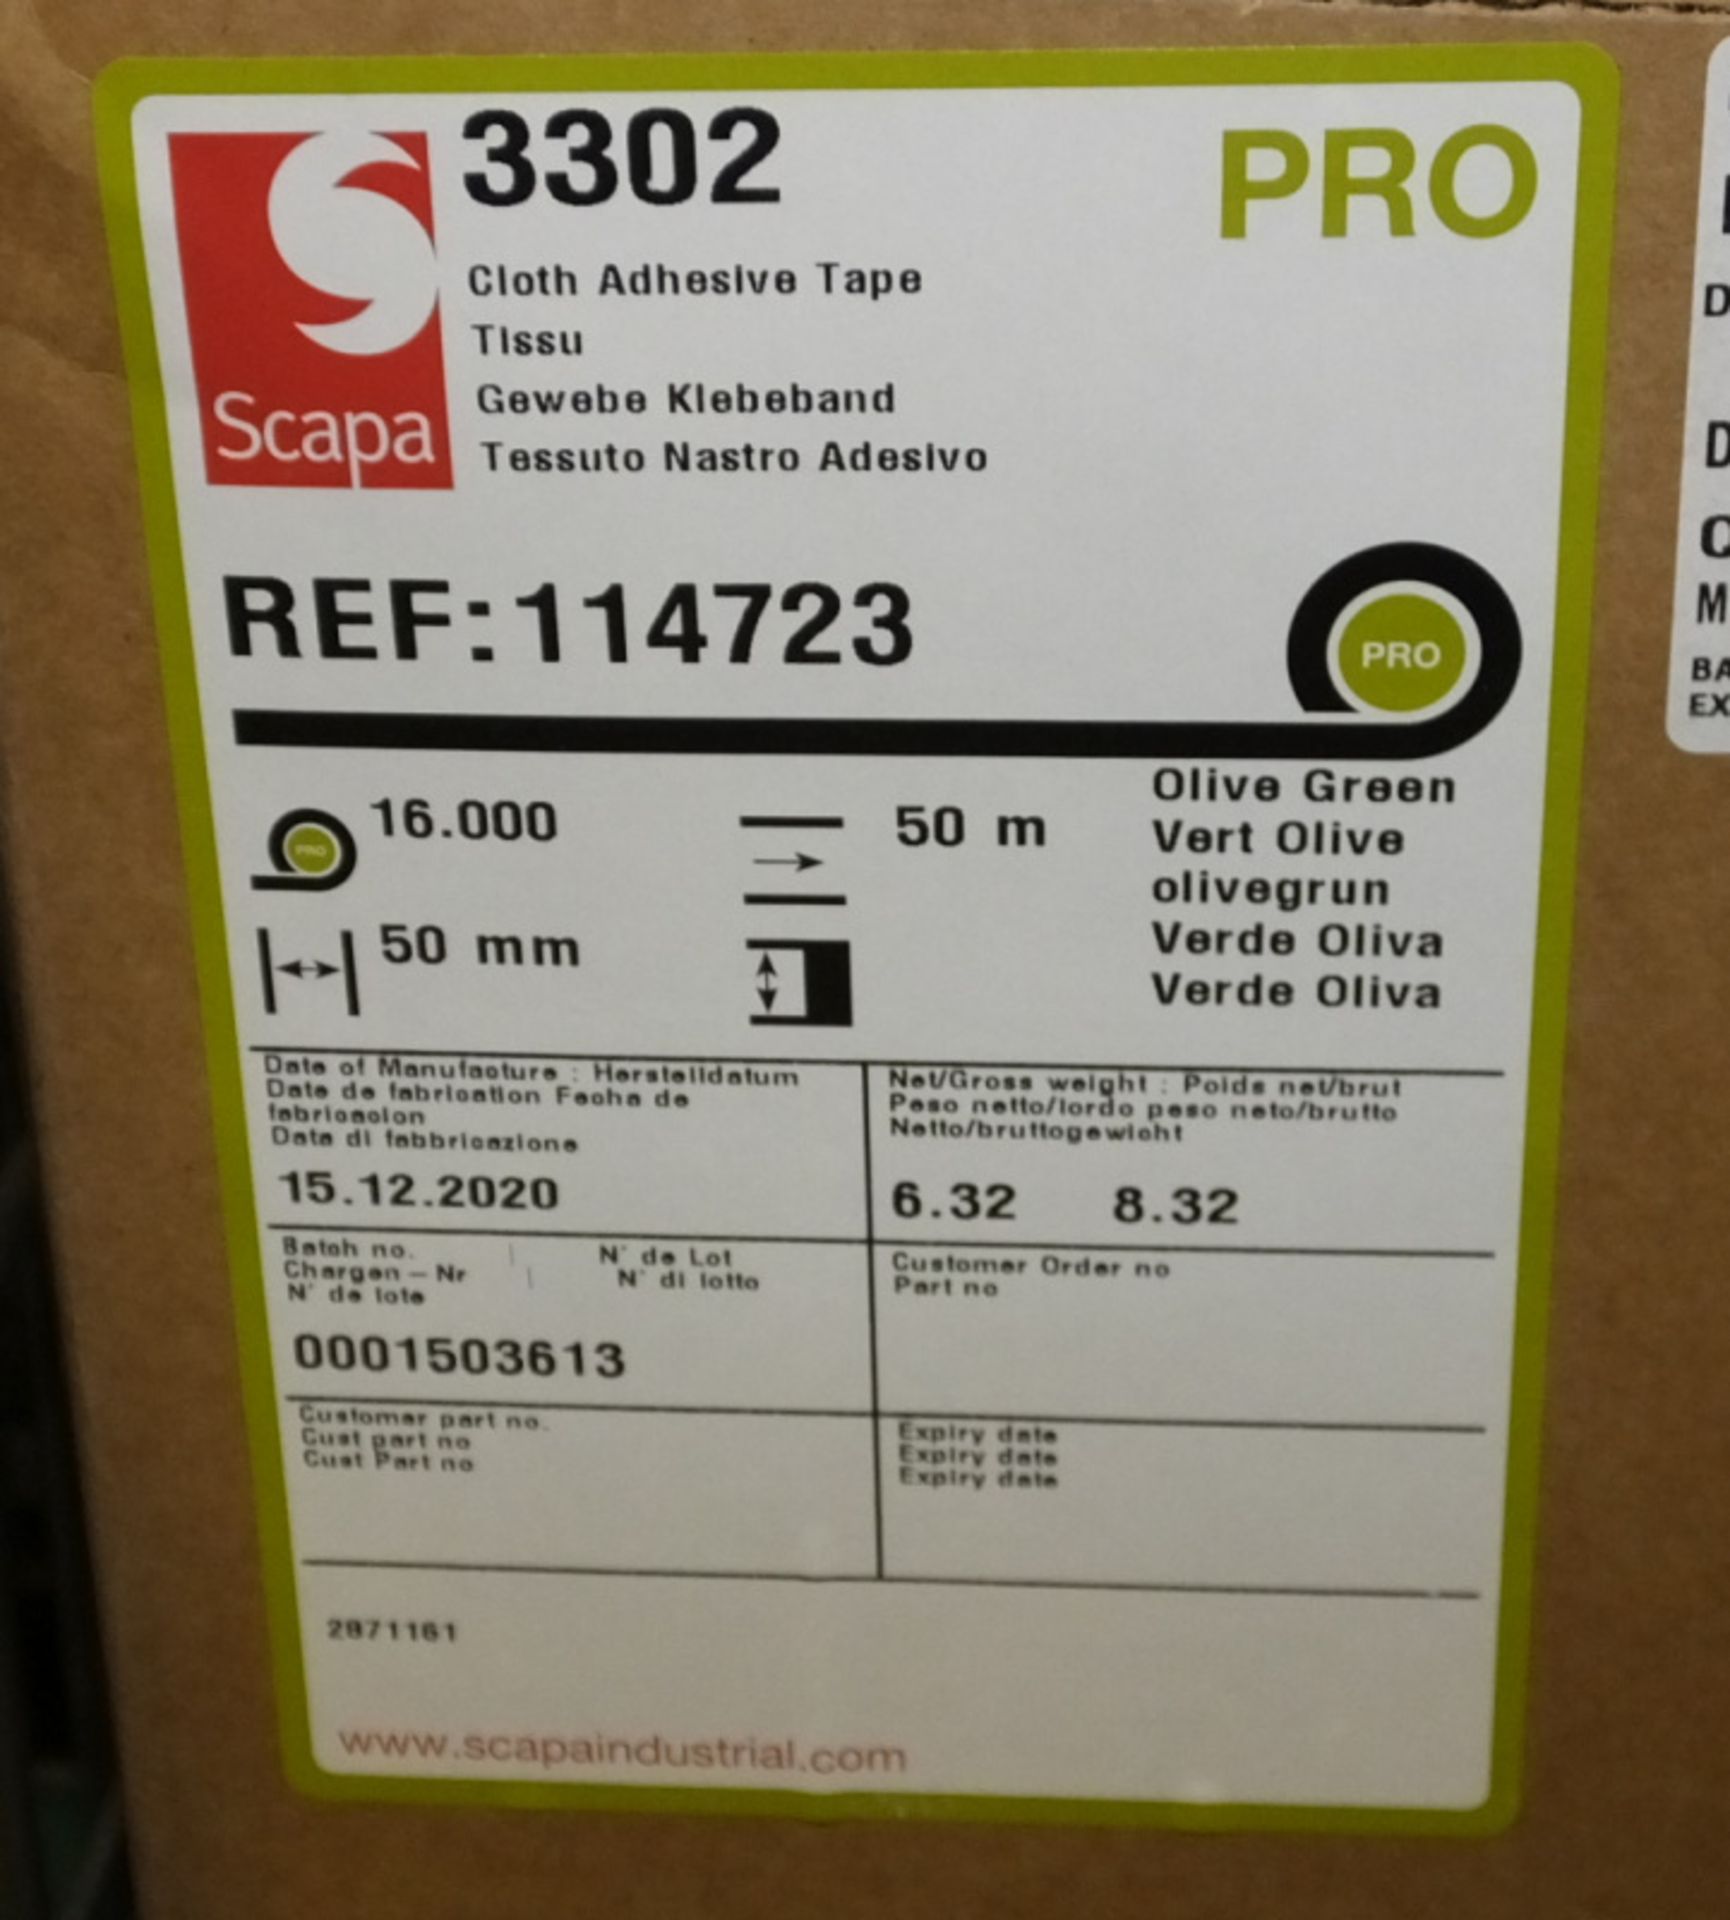 Scapa 3302 PRO Olive Green - 50mm x 50M - 16 rolls per box - 2 boxes - Image 3 of 3